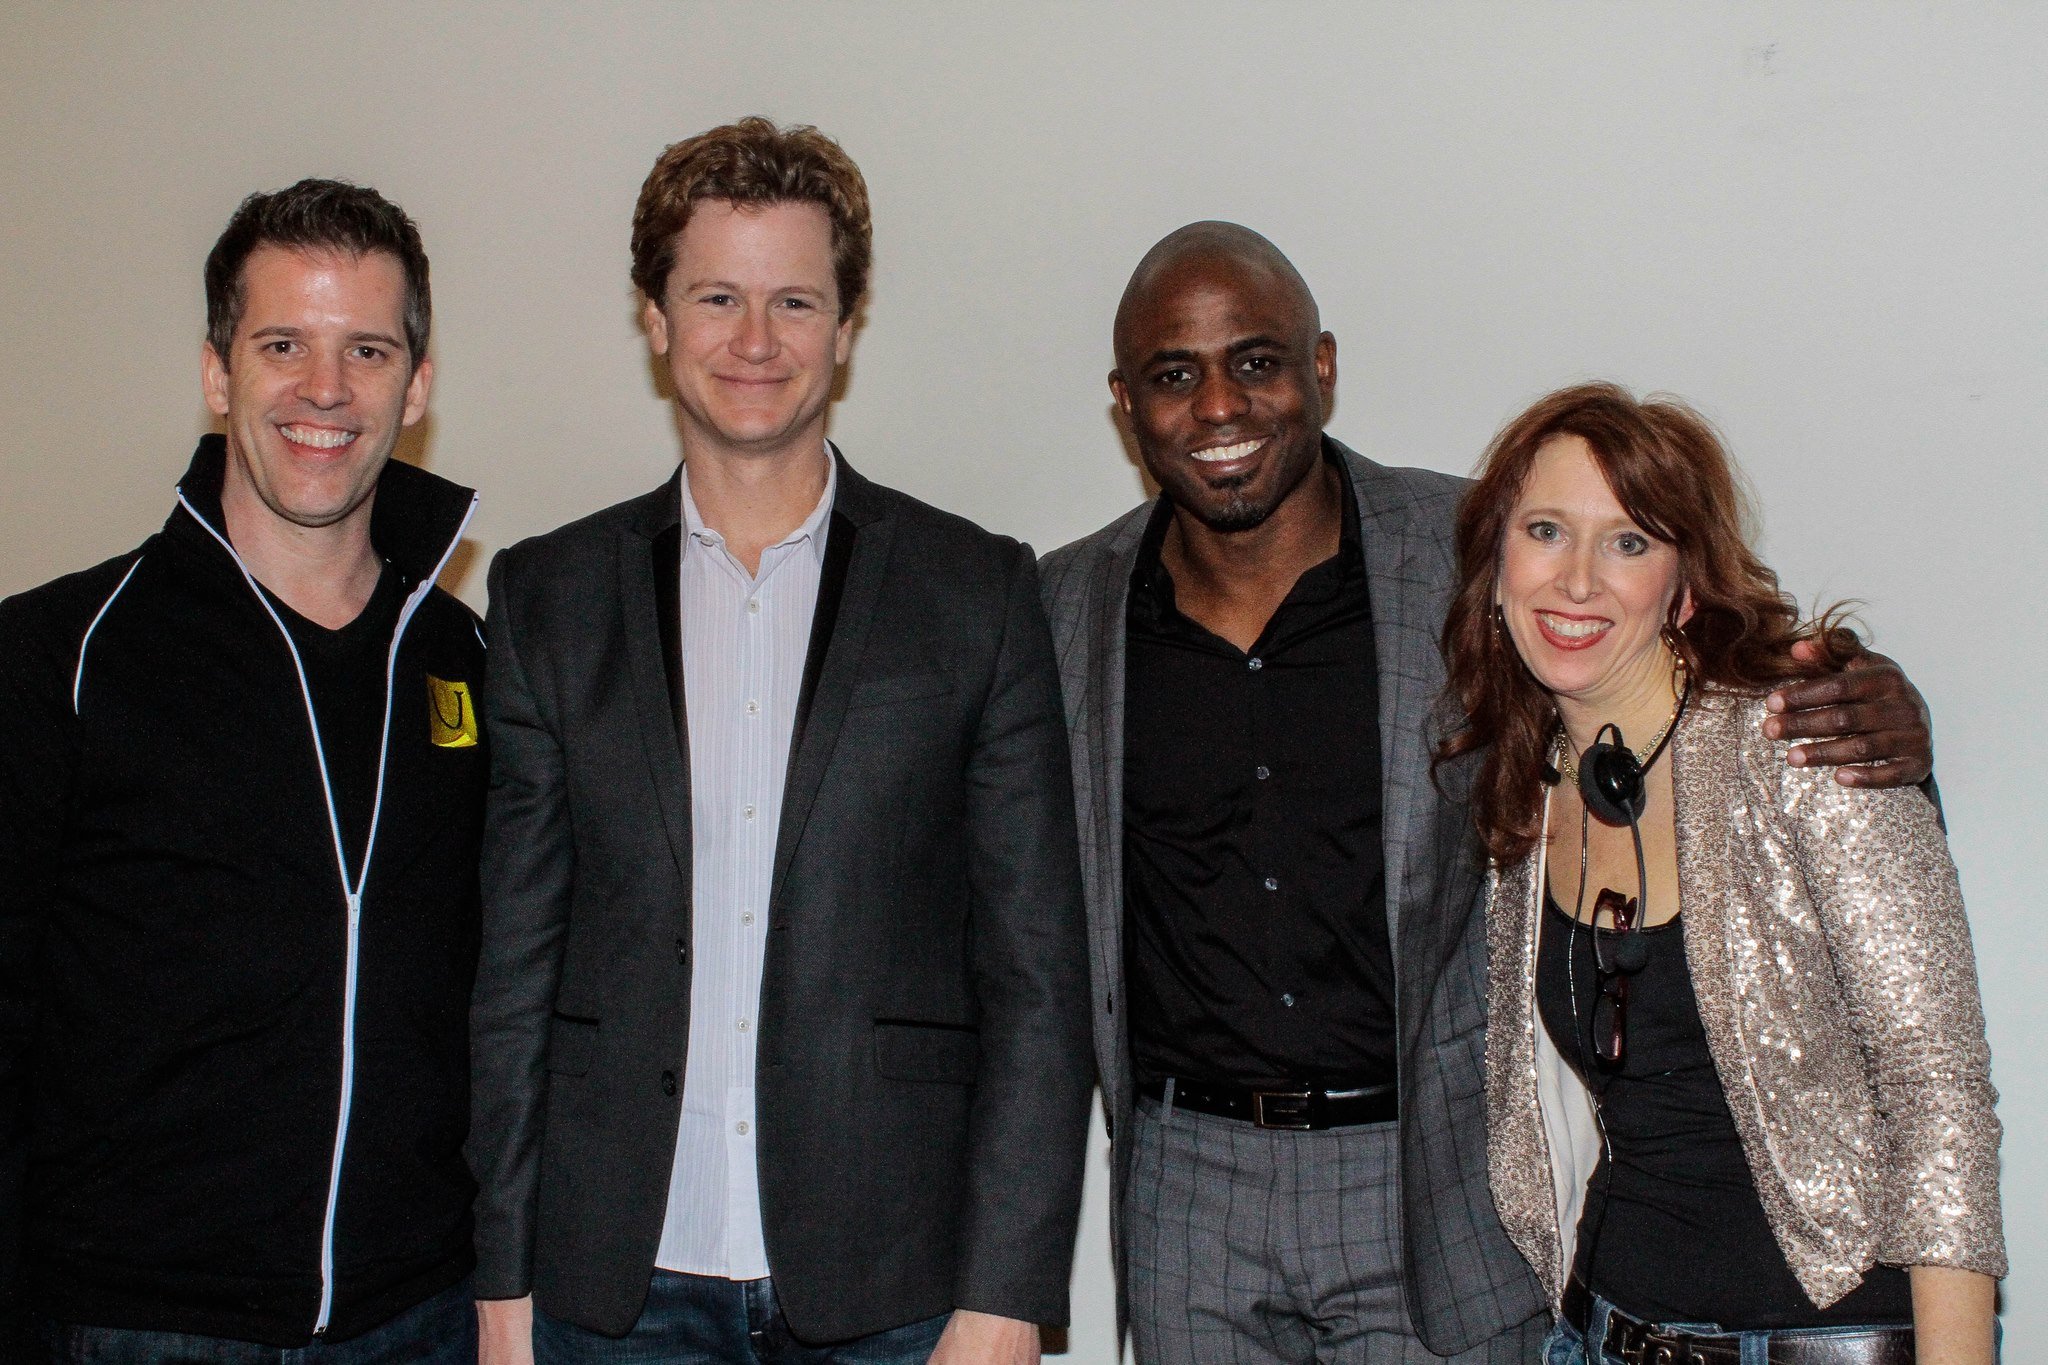 With Wayne Brady and Jonathan Mangum for LaughFest